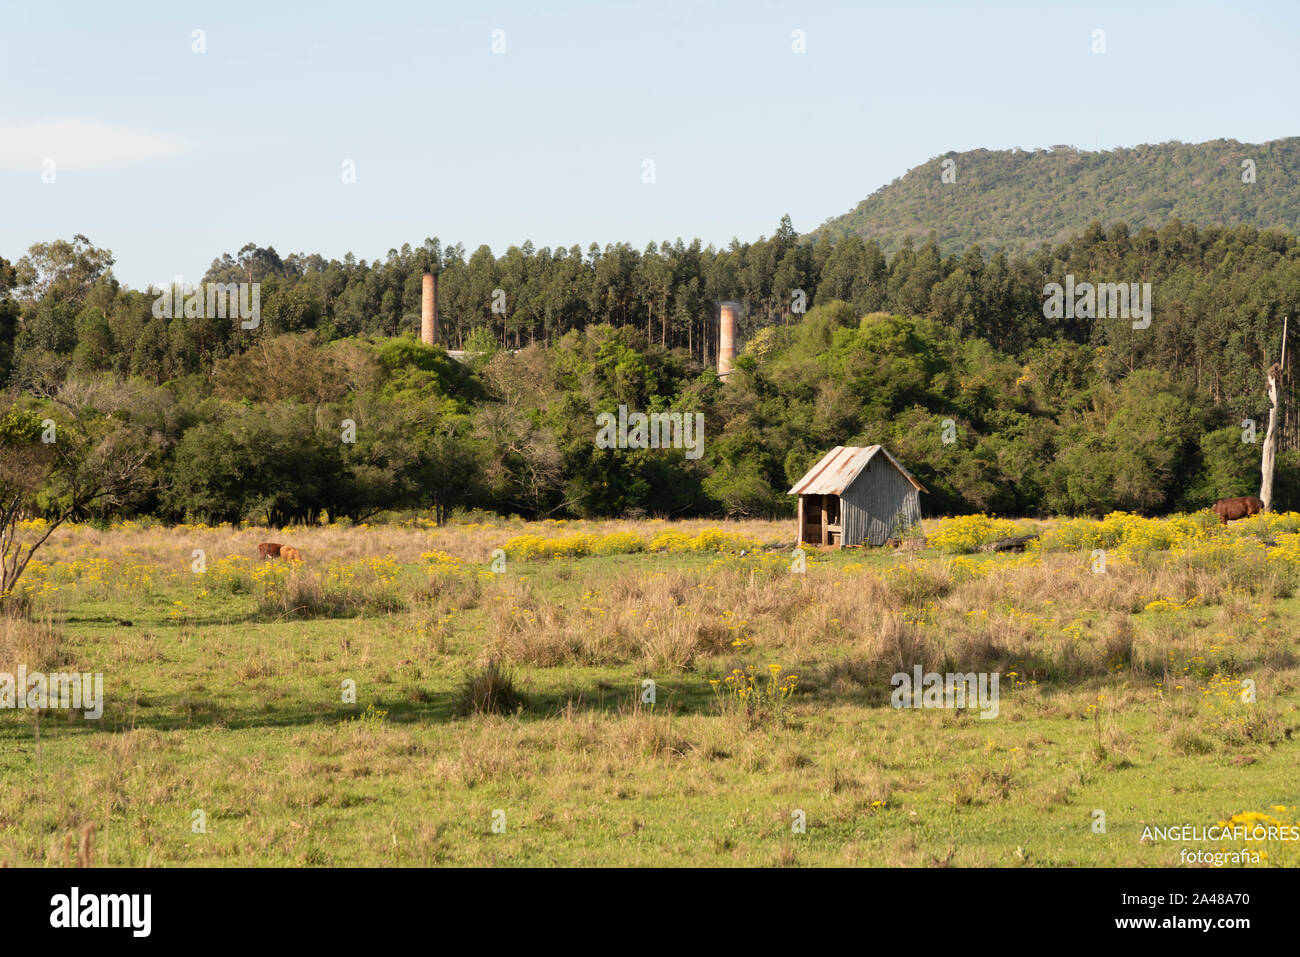 a small wooden stable built amid the flowering field of daisy flowers. In the background of the scene can be seen the towers of an abandoned factory. Stock Photo